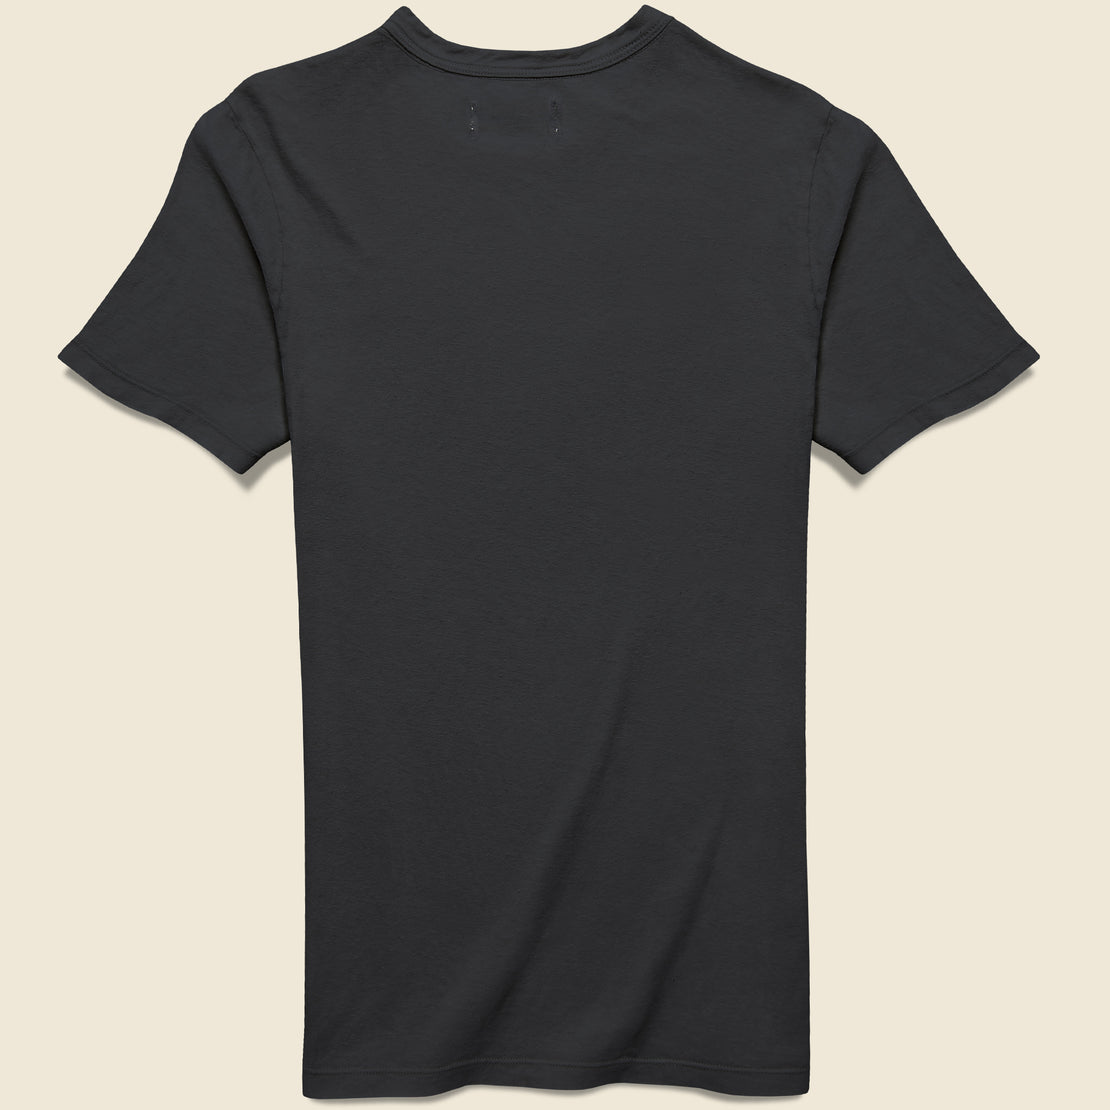 Pocket Tee - Faded Black - Imogene + Willie - STAG Provisions - Tops - S/S Tee